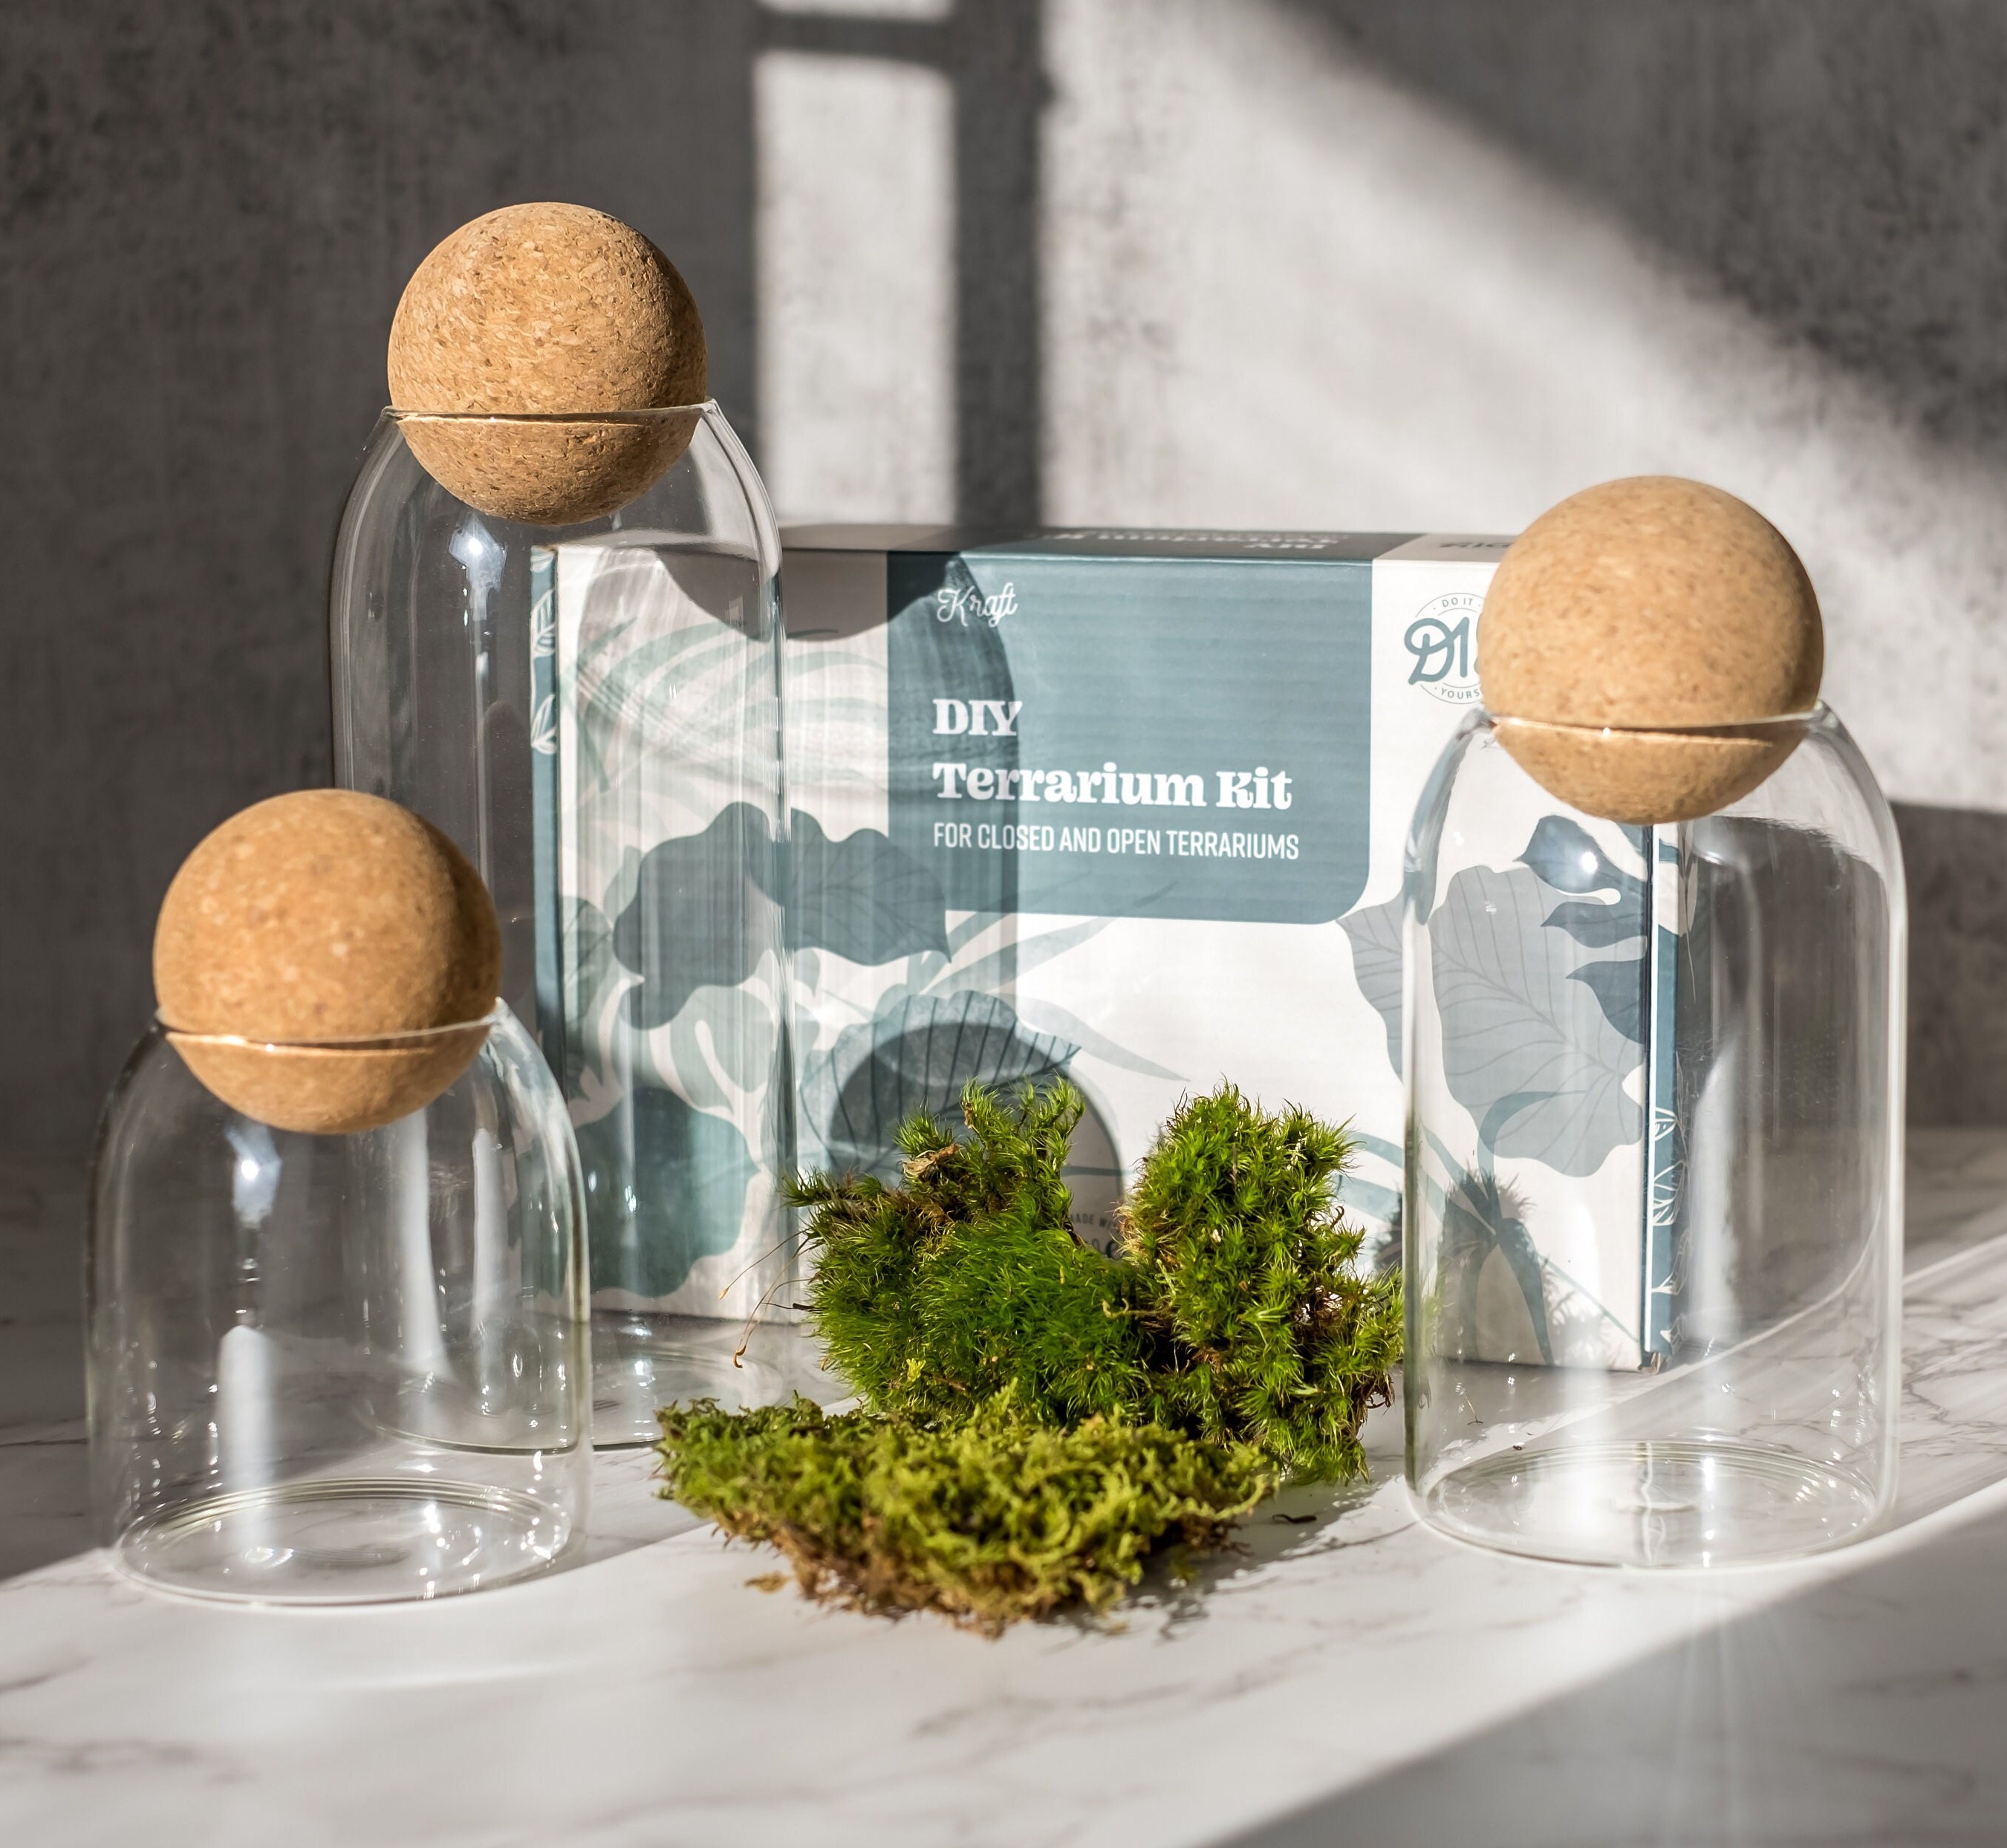 Family Size Closed Terrarium Kit With Moss With Plants3x and Terrarium  Container3x, Nature Inspired Decor With VIDEO INSTRUCTIONS 